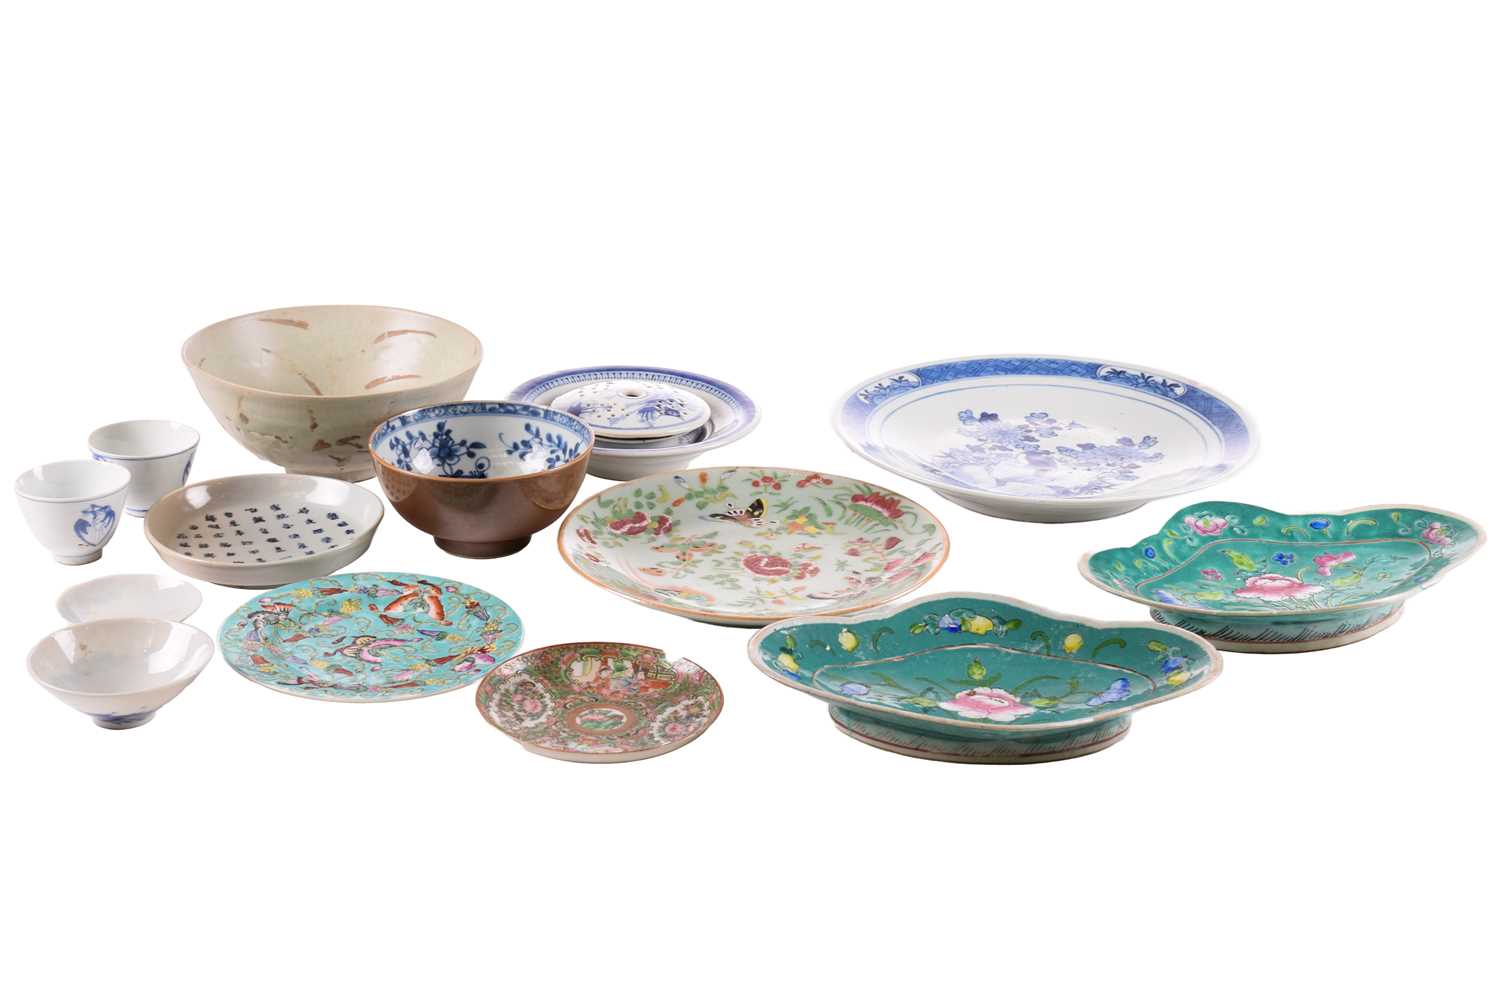 An assortment of Chinese porcelain, Ming - Qing dynasty, to include a Swatow bowl from the Bi